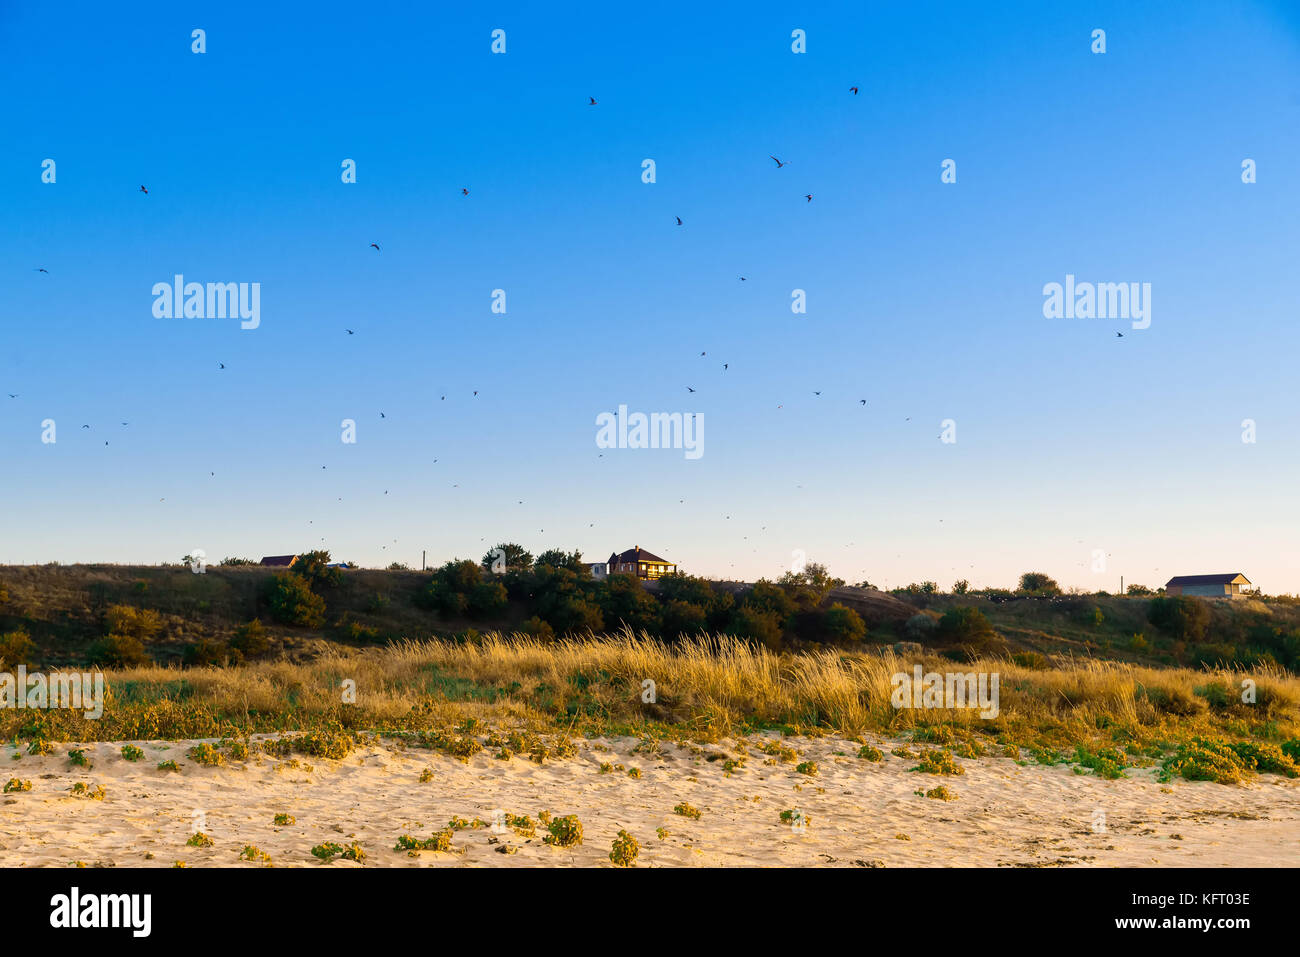 Rural lanscape hill on seashore with birds in sky Stock Photo